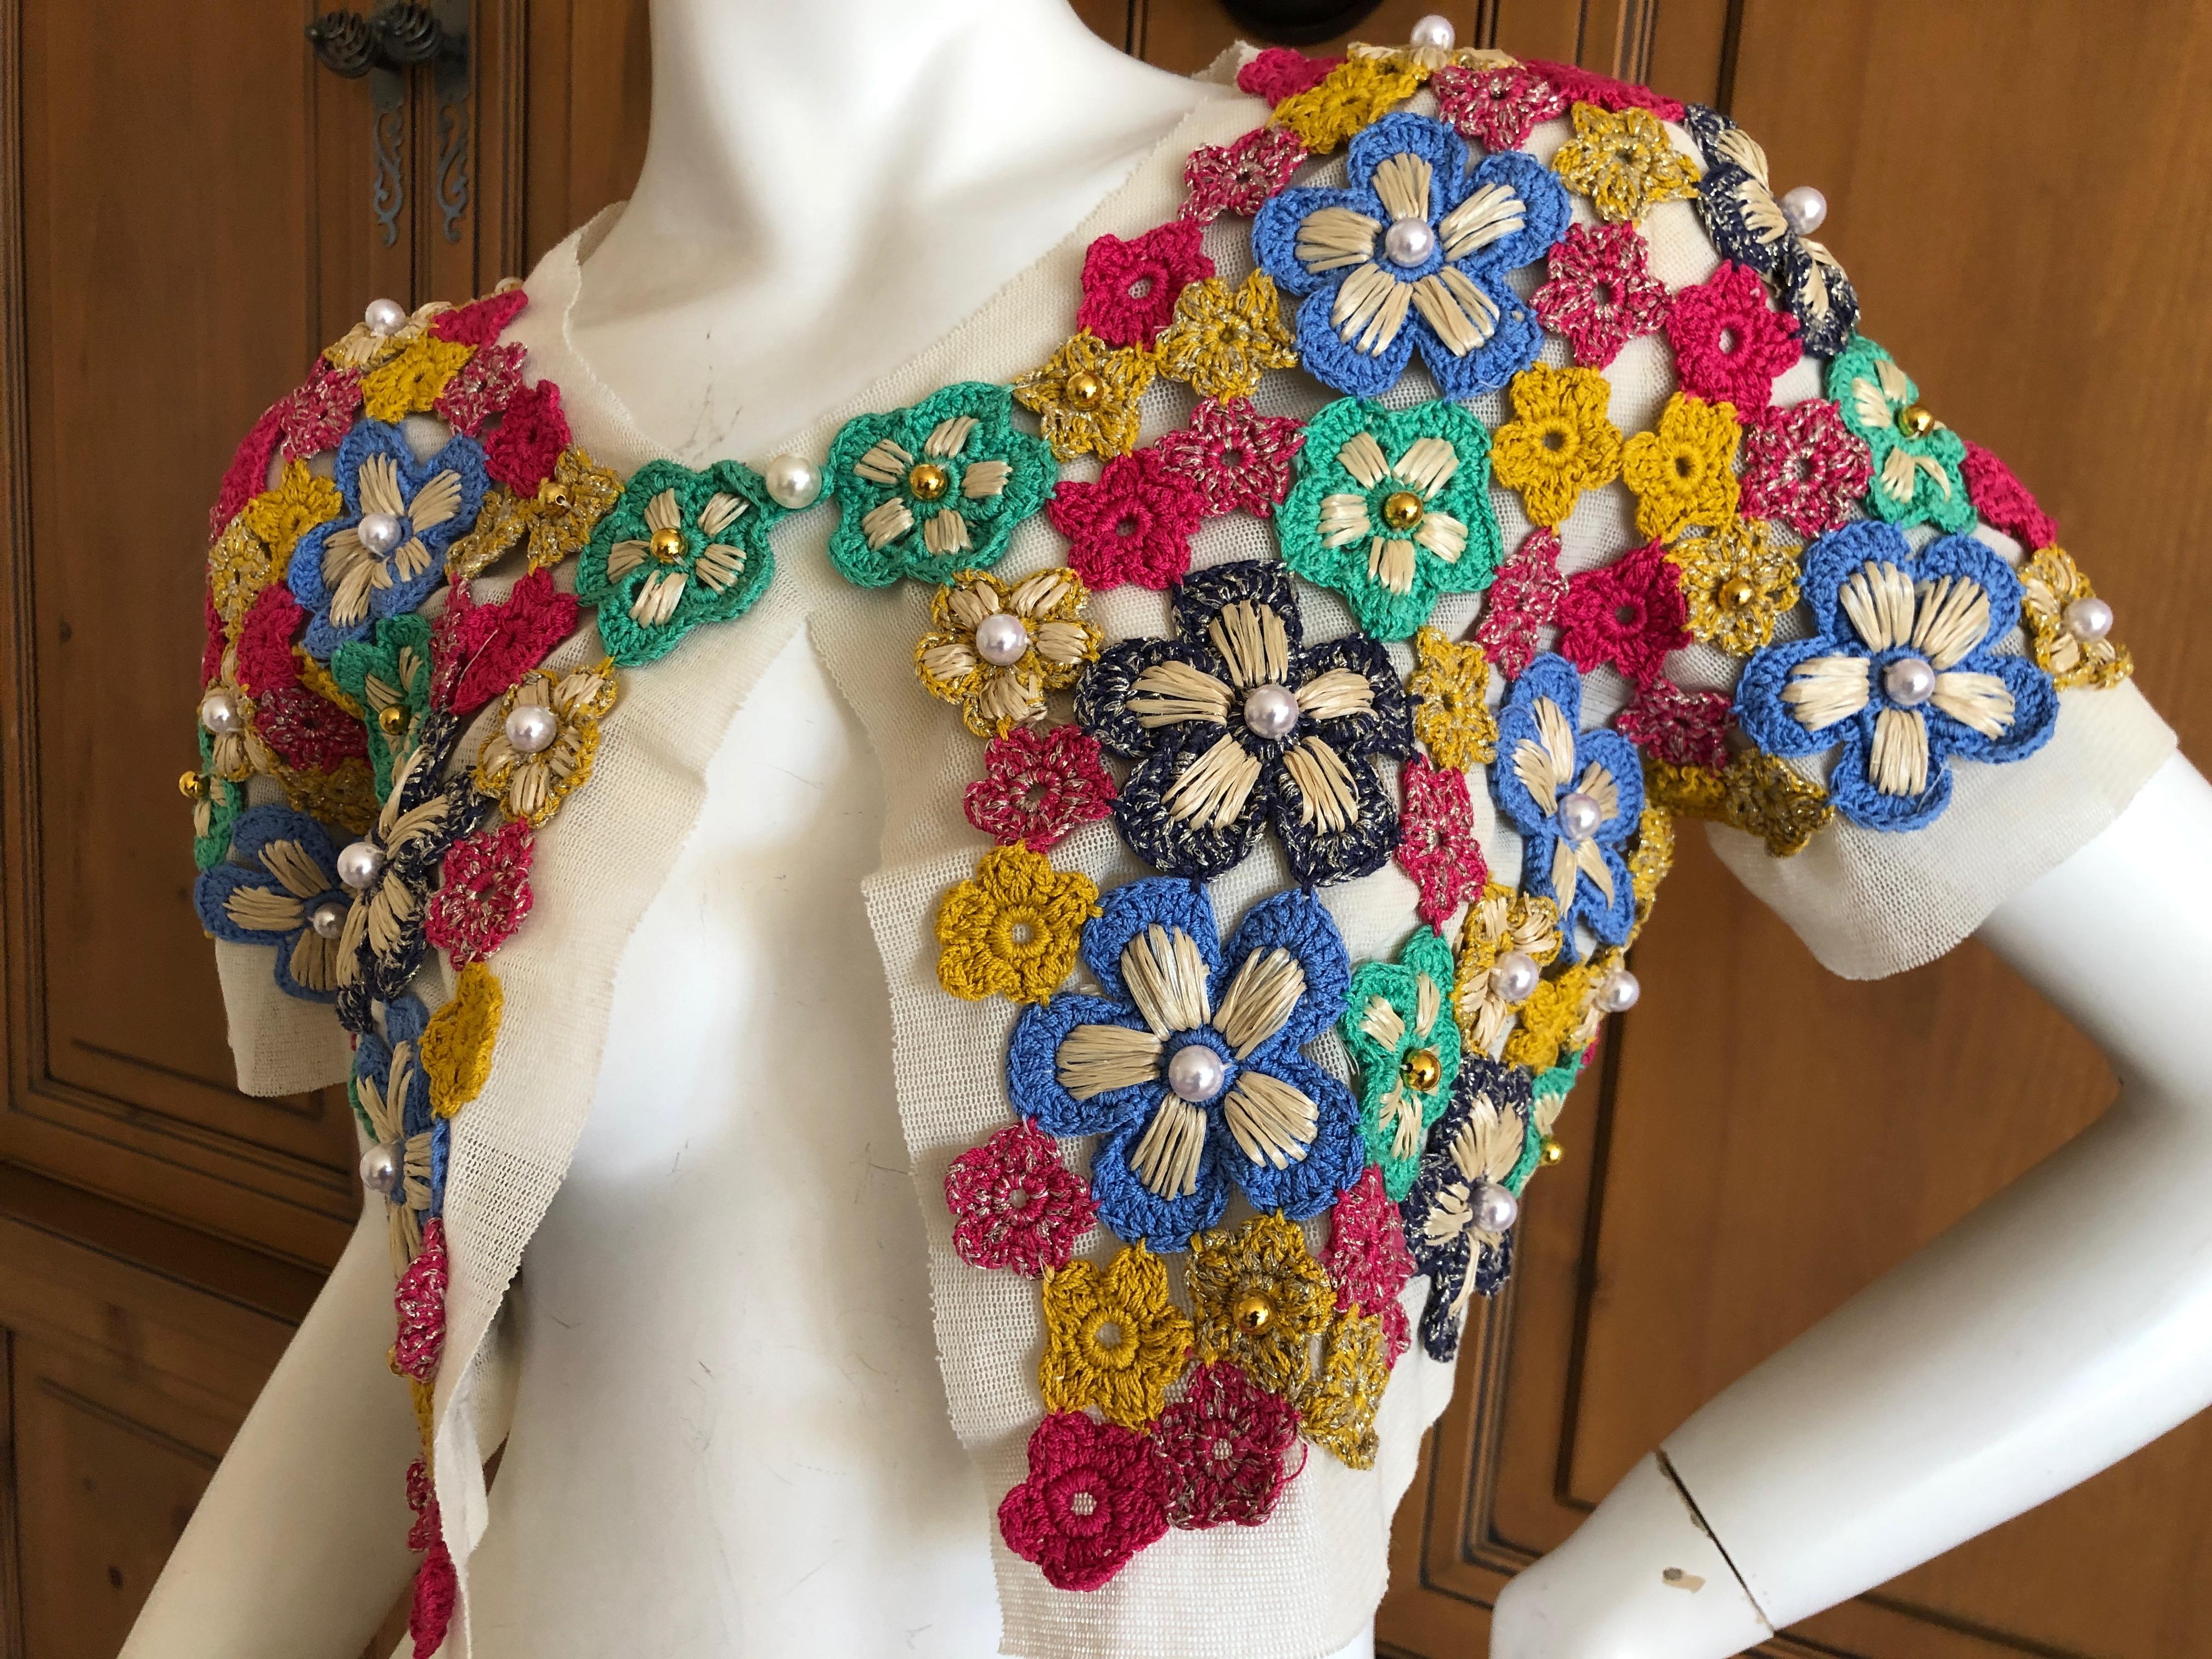 Moschino Hippy Chick Crochet Embellished Shrug for Moschino Cheap & Chic
So festive and fun, use zoom to see details.
Perfect for Festival wear

US sz 4.

Bust 36